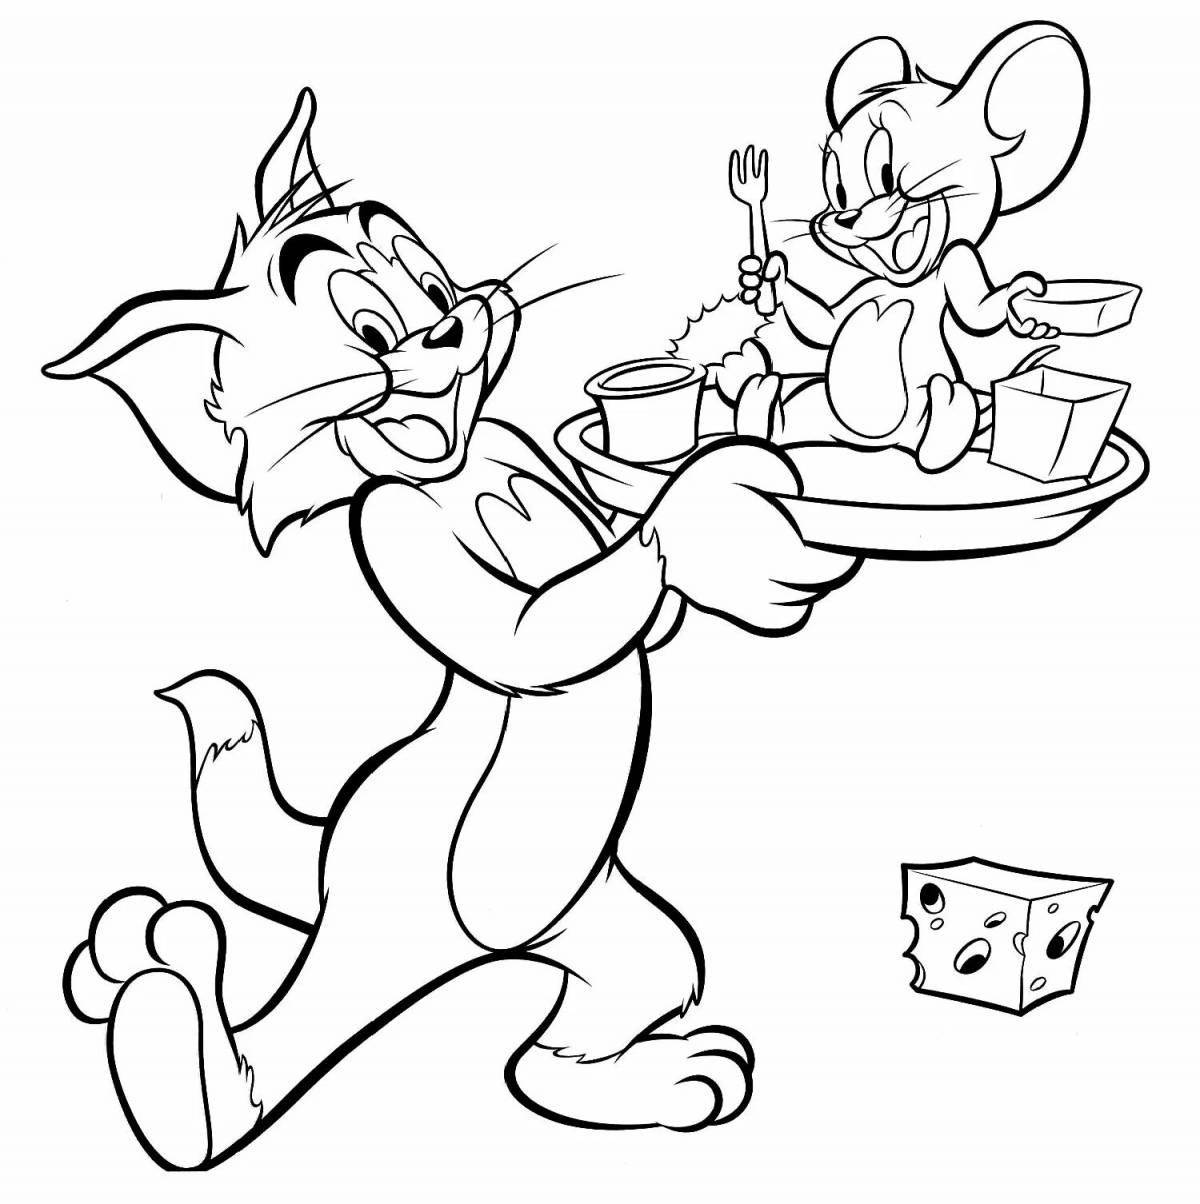 Bright tom and jerry coloring pages